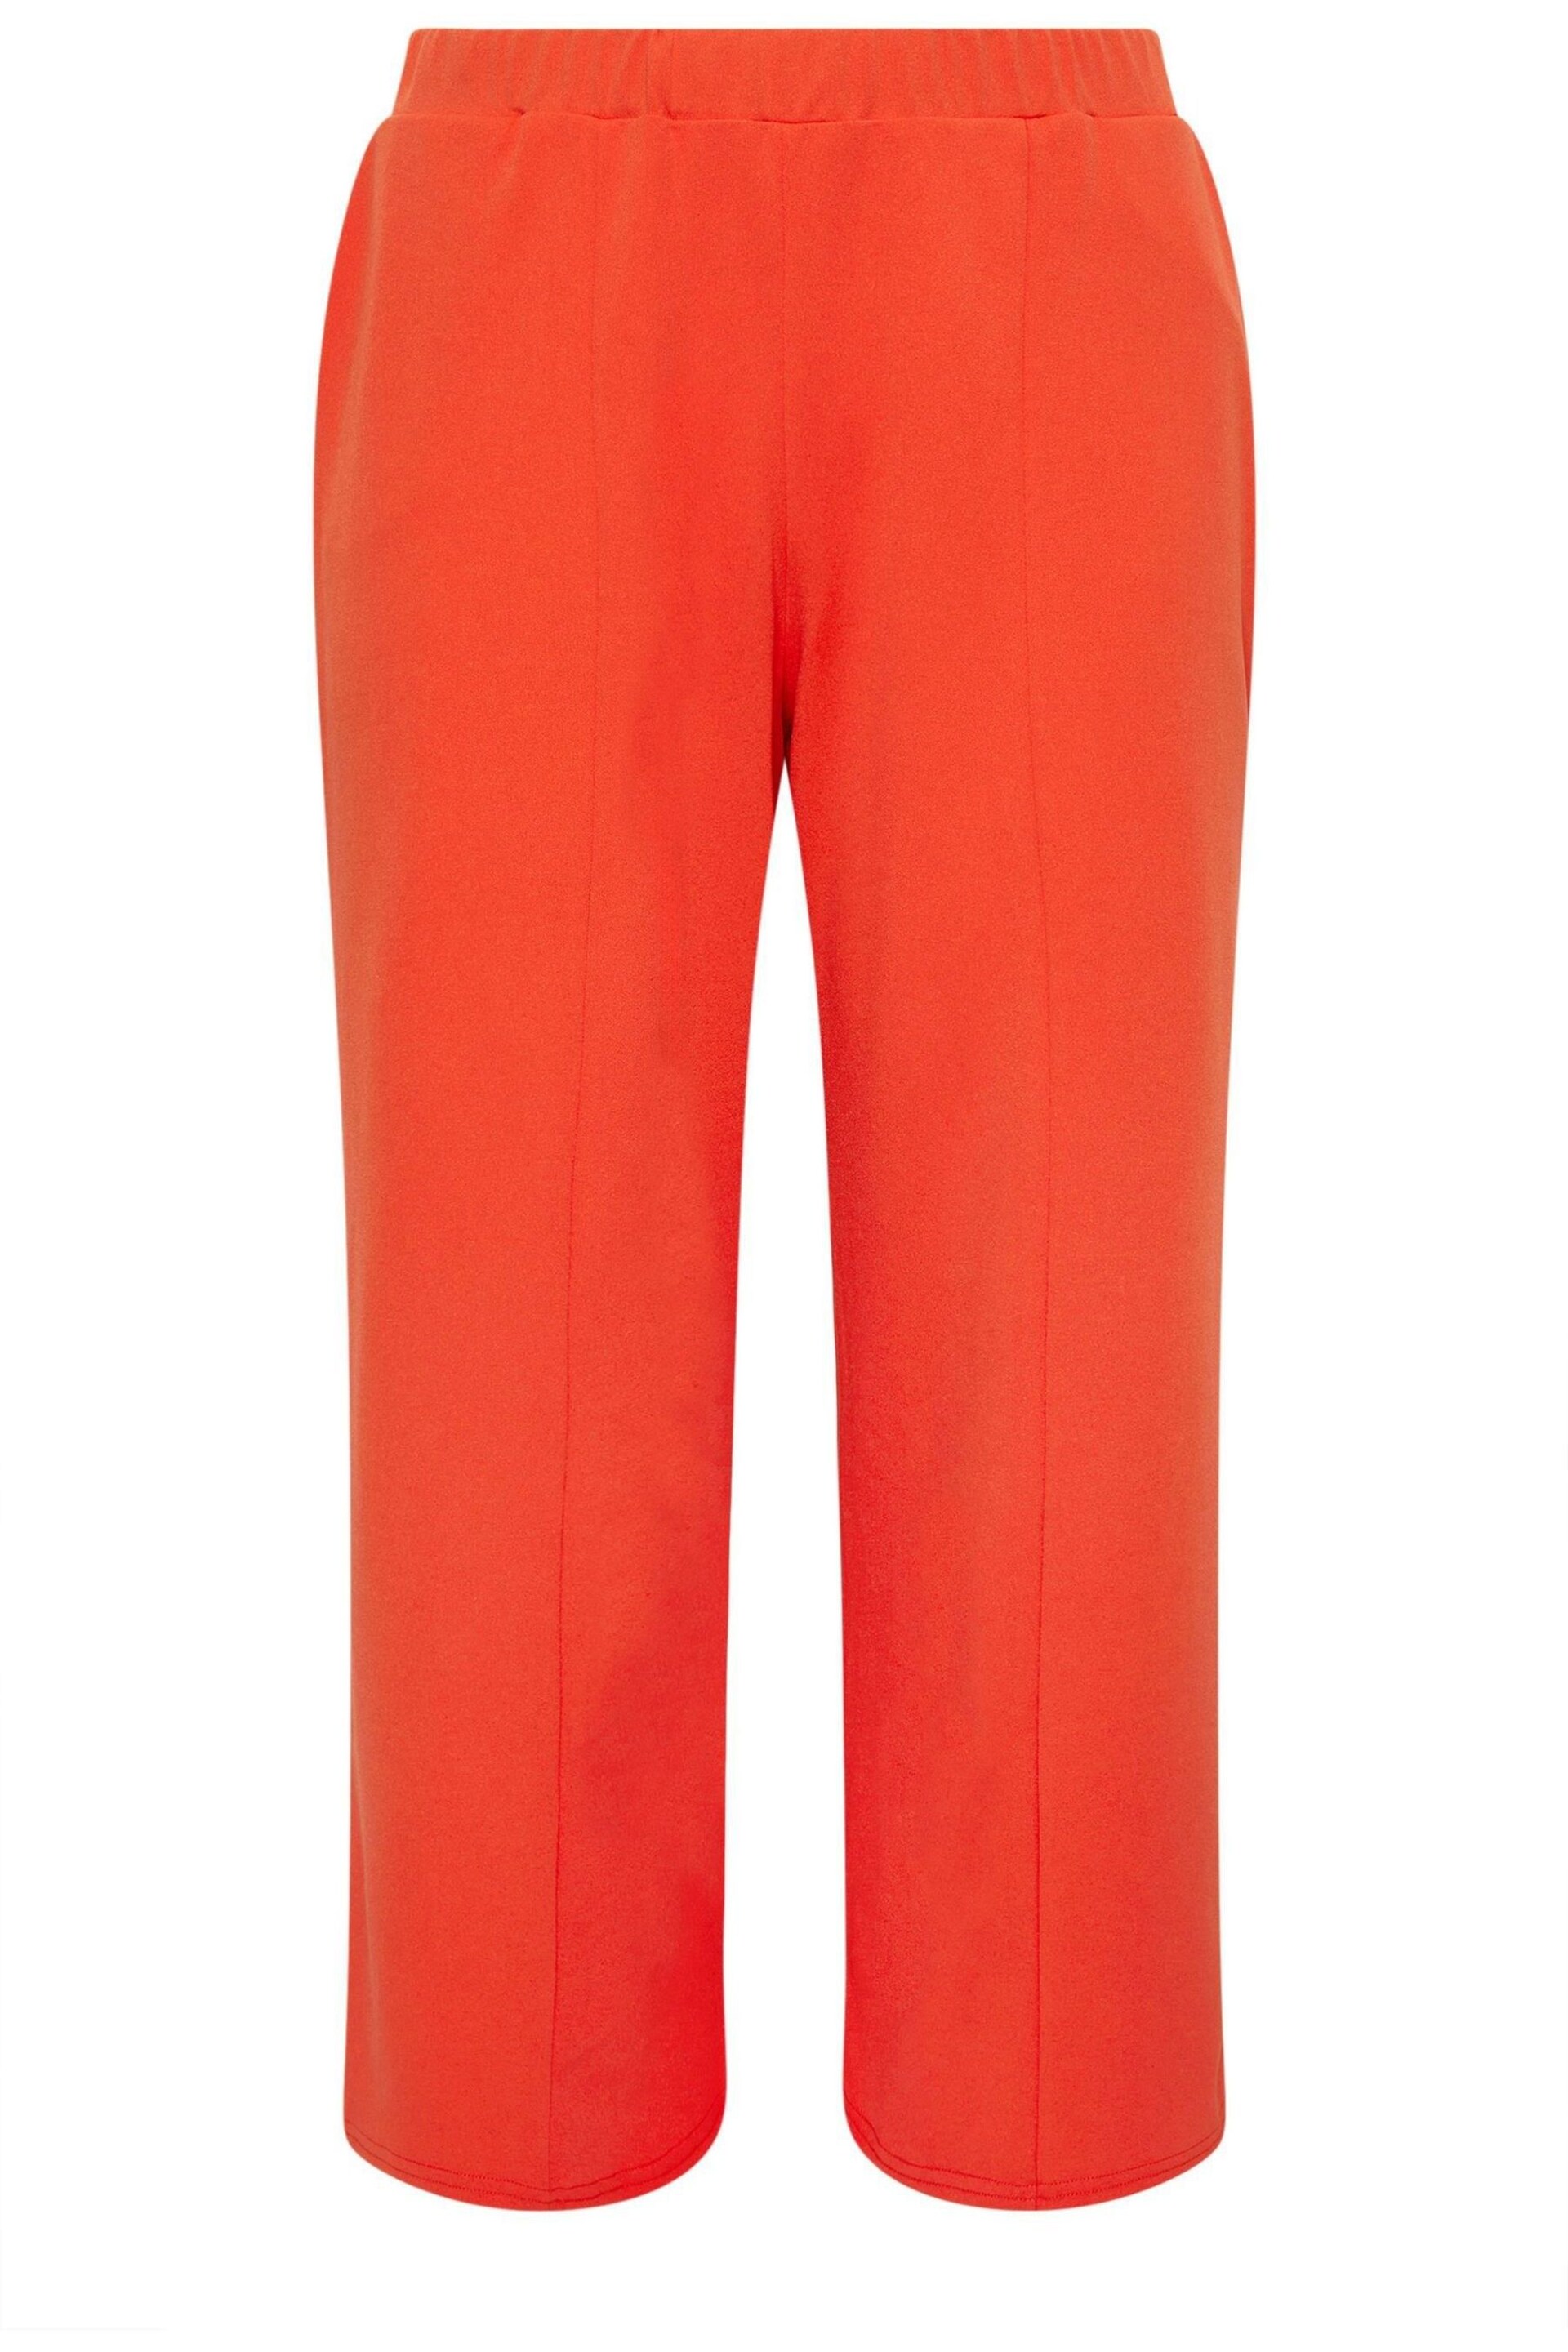 Yours Curve Orange LIMITED COLLECTION Curve Pink Wide Leg Trousers - Image 5 of 5